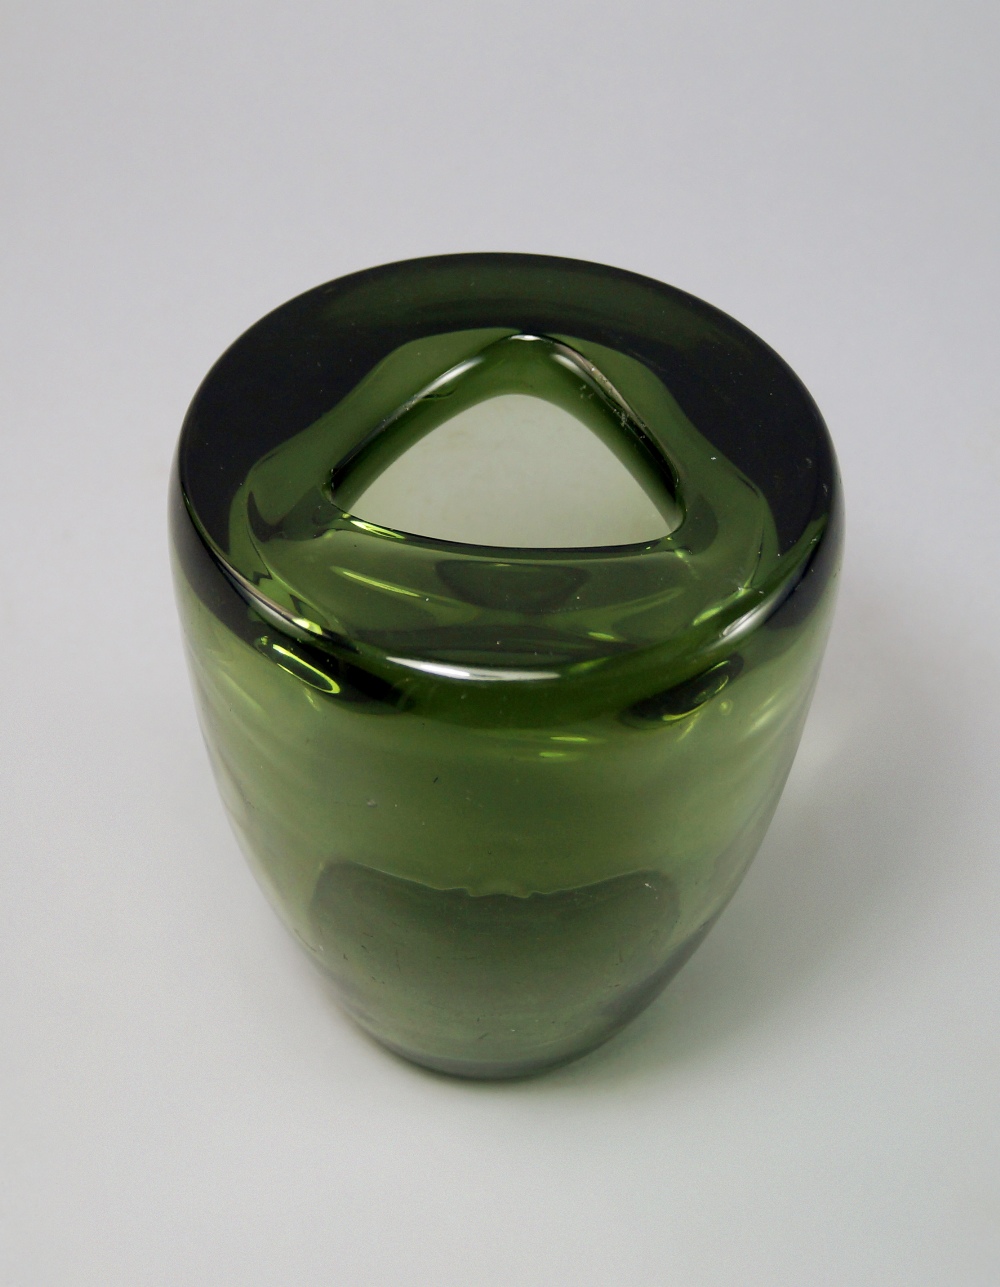 A Leerdam green glass vase, c. 1940, of waisted form with a triangular aperture, etched mark to